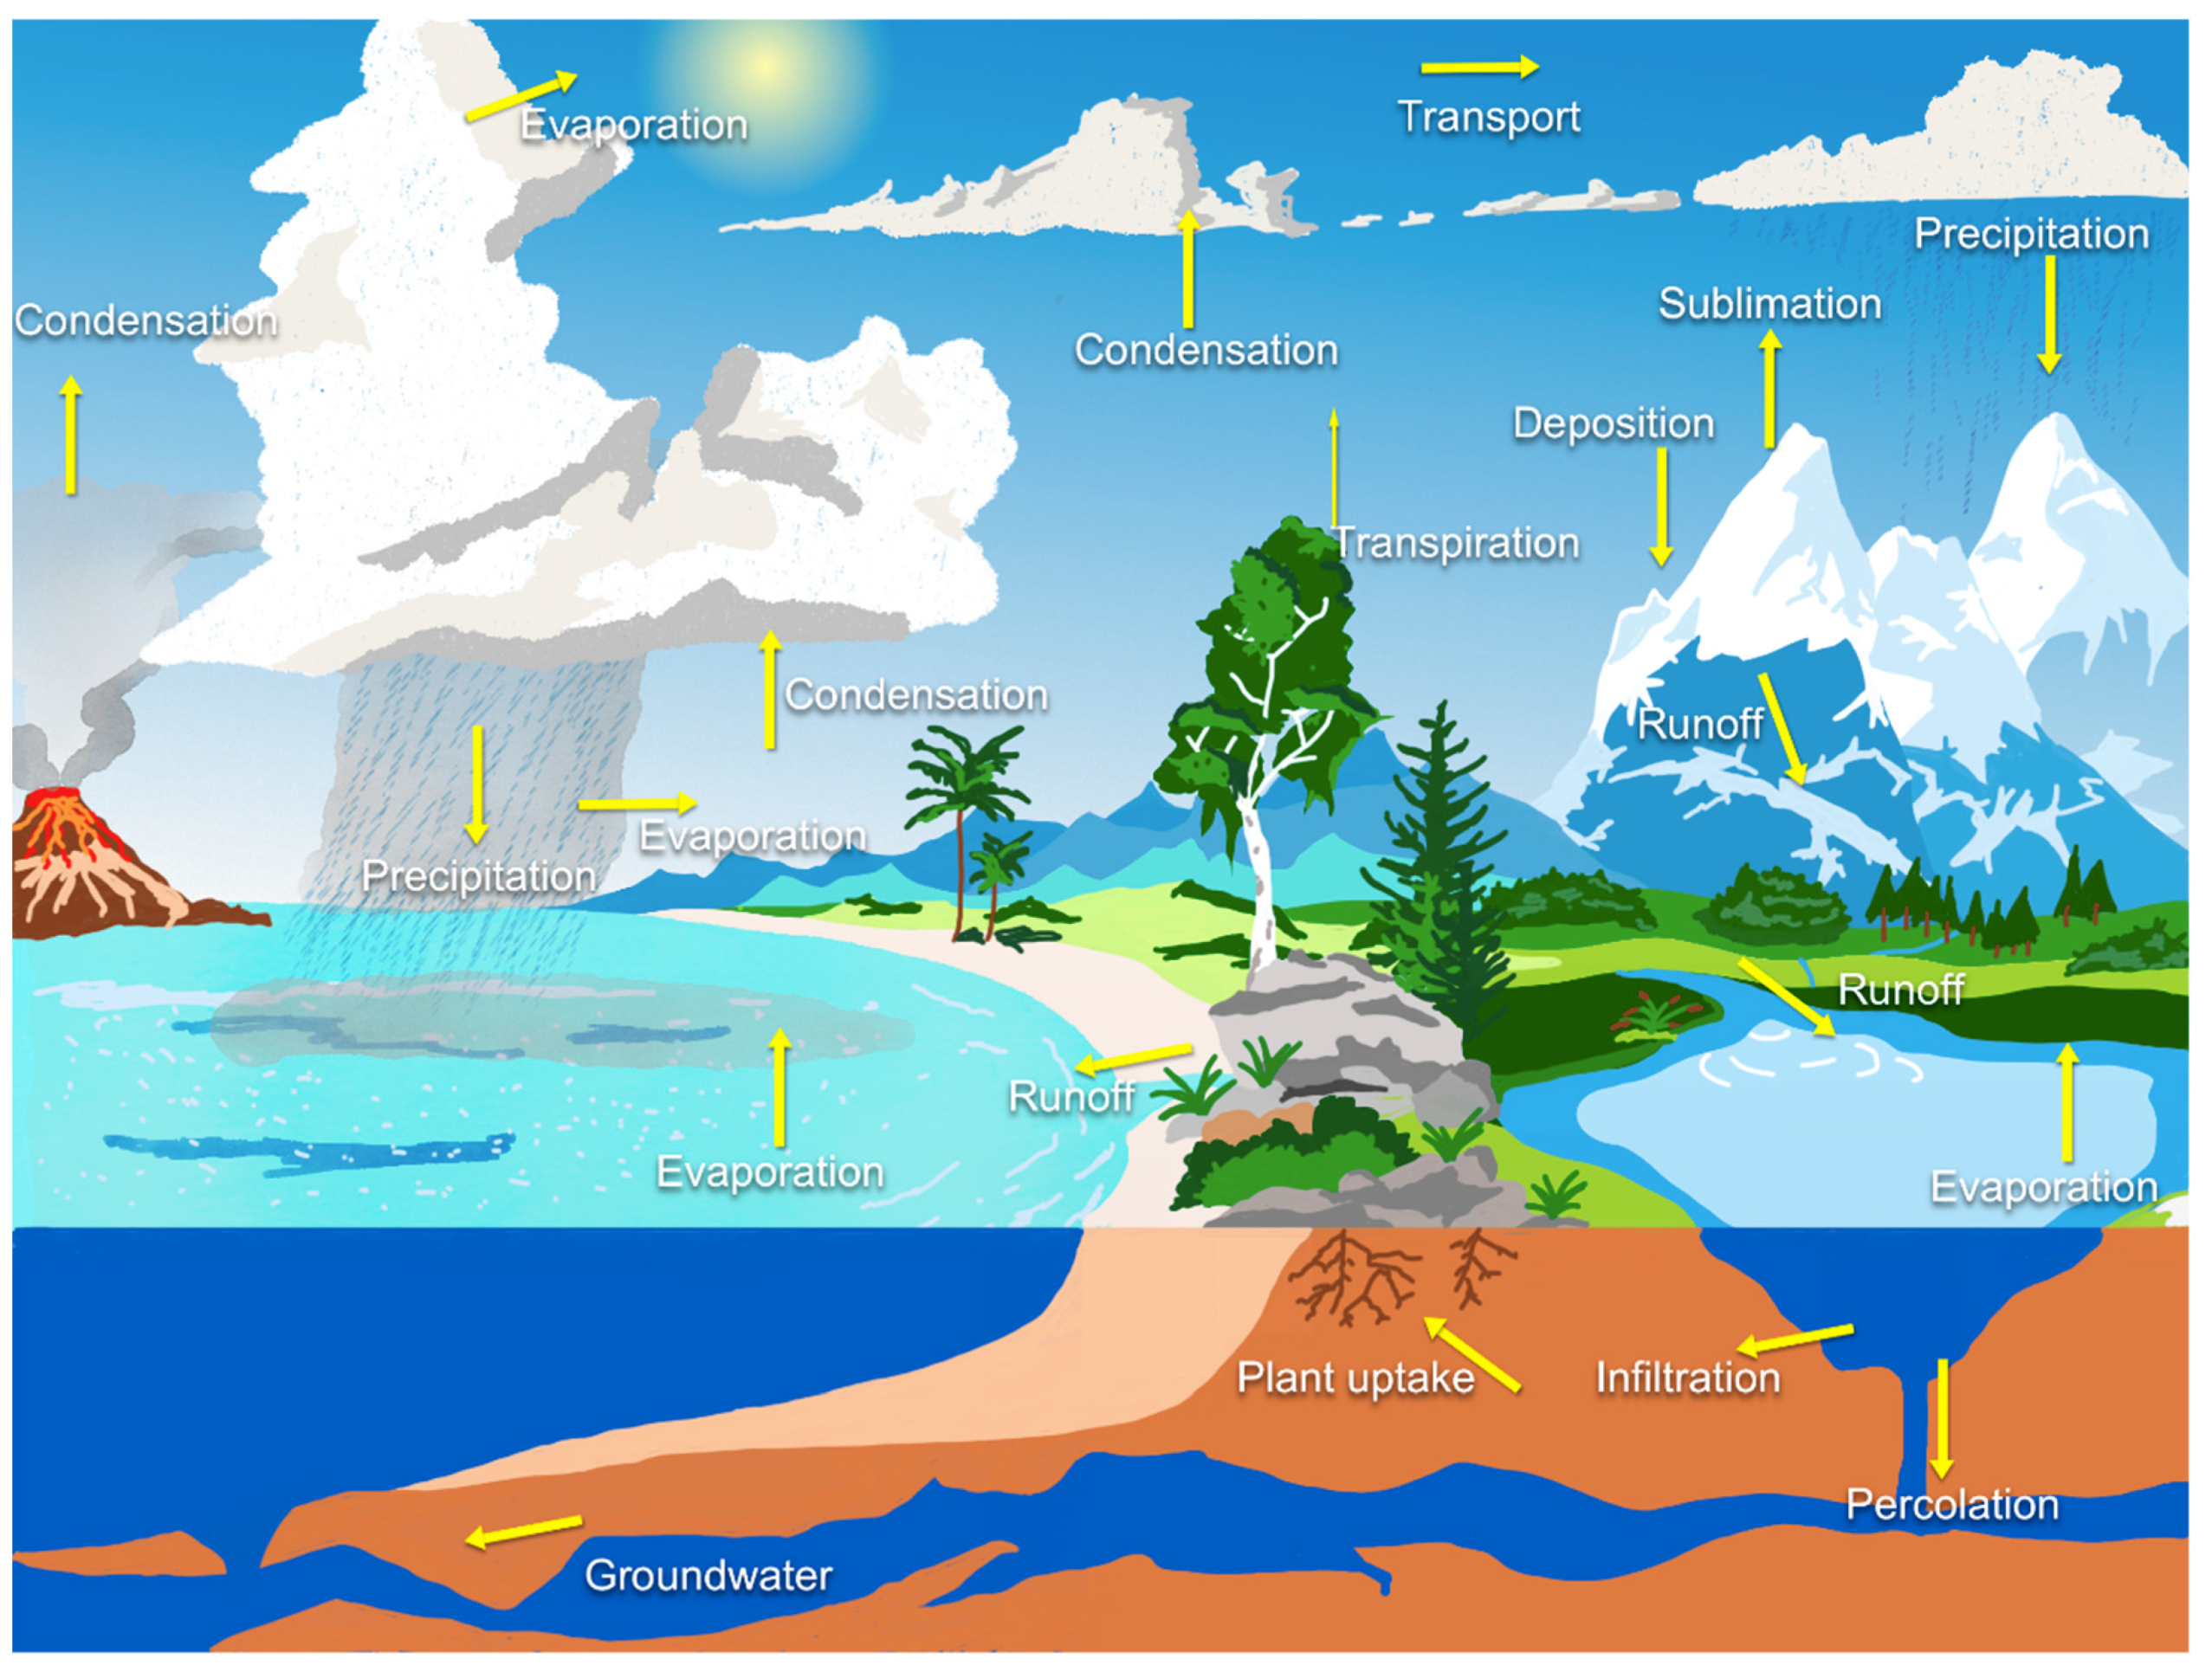 The artist view of the global water cycle and the WCOM This is the